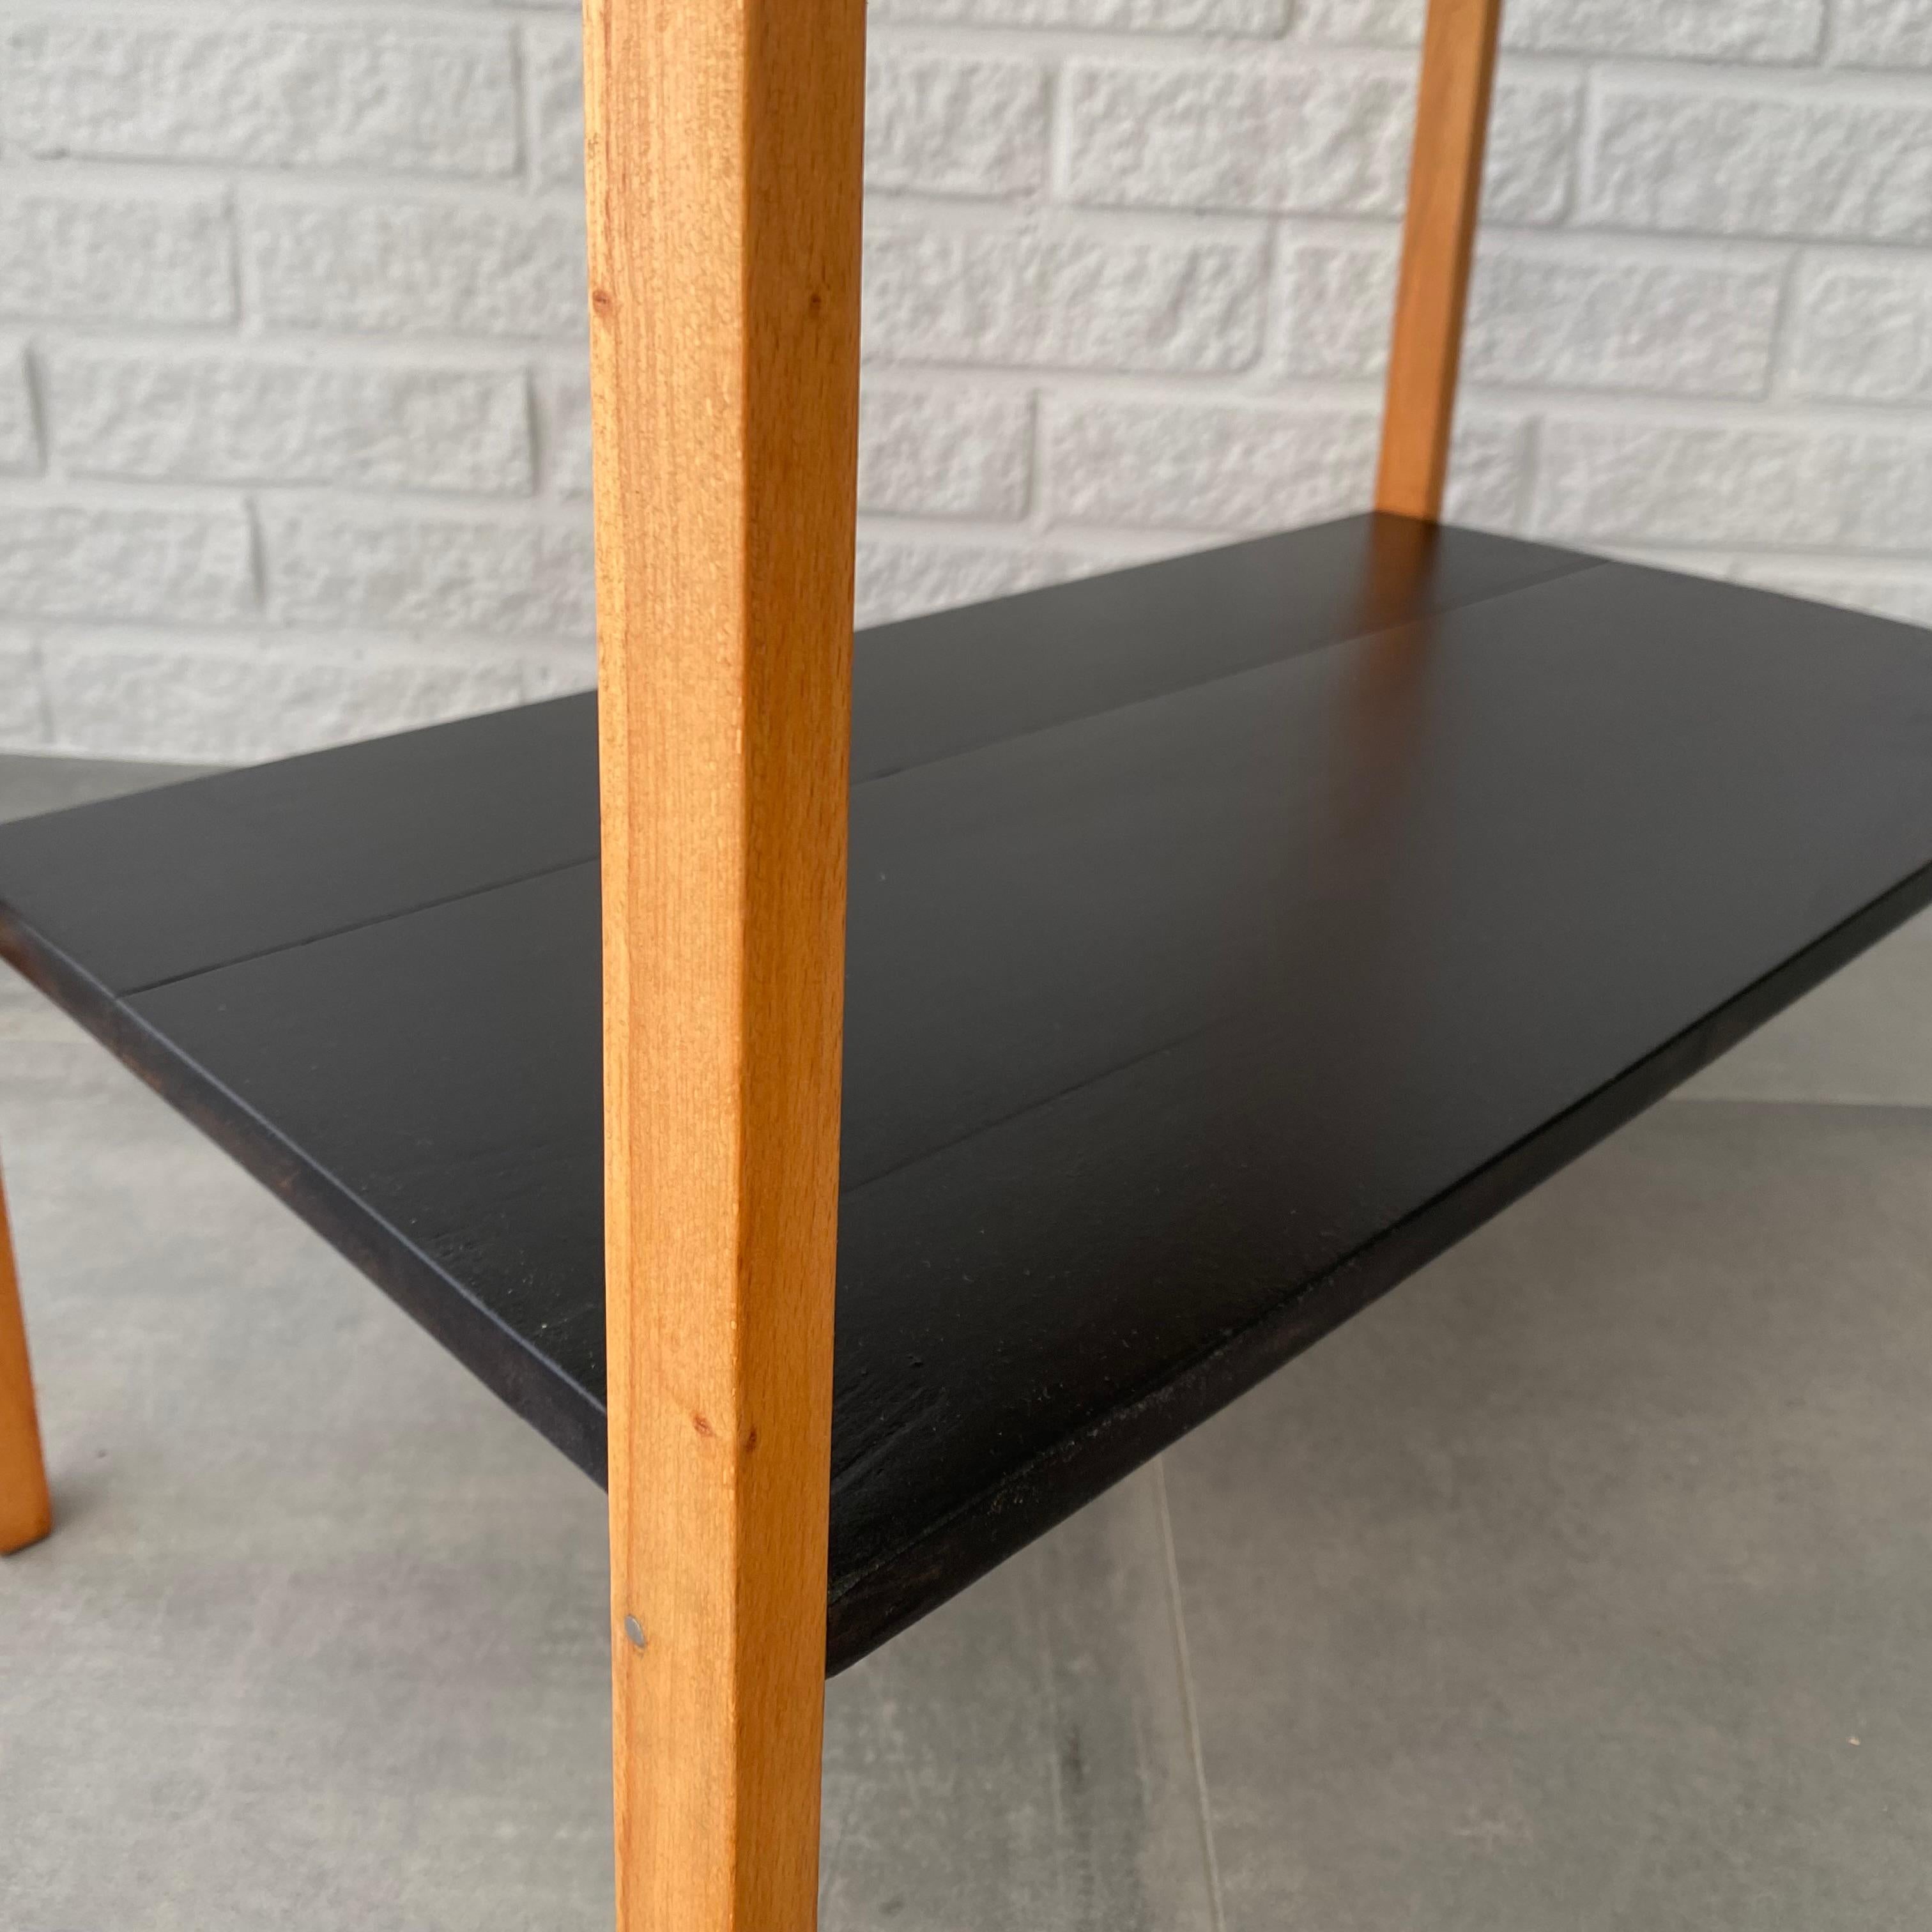 Mid-20th Century Bentwood modernist side table by Gemla Fabriker, Sweden, 1930s For Sale